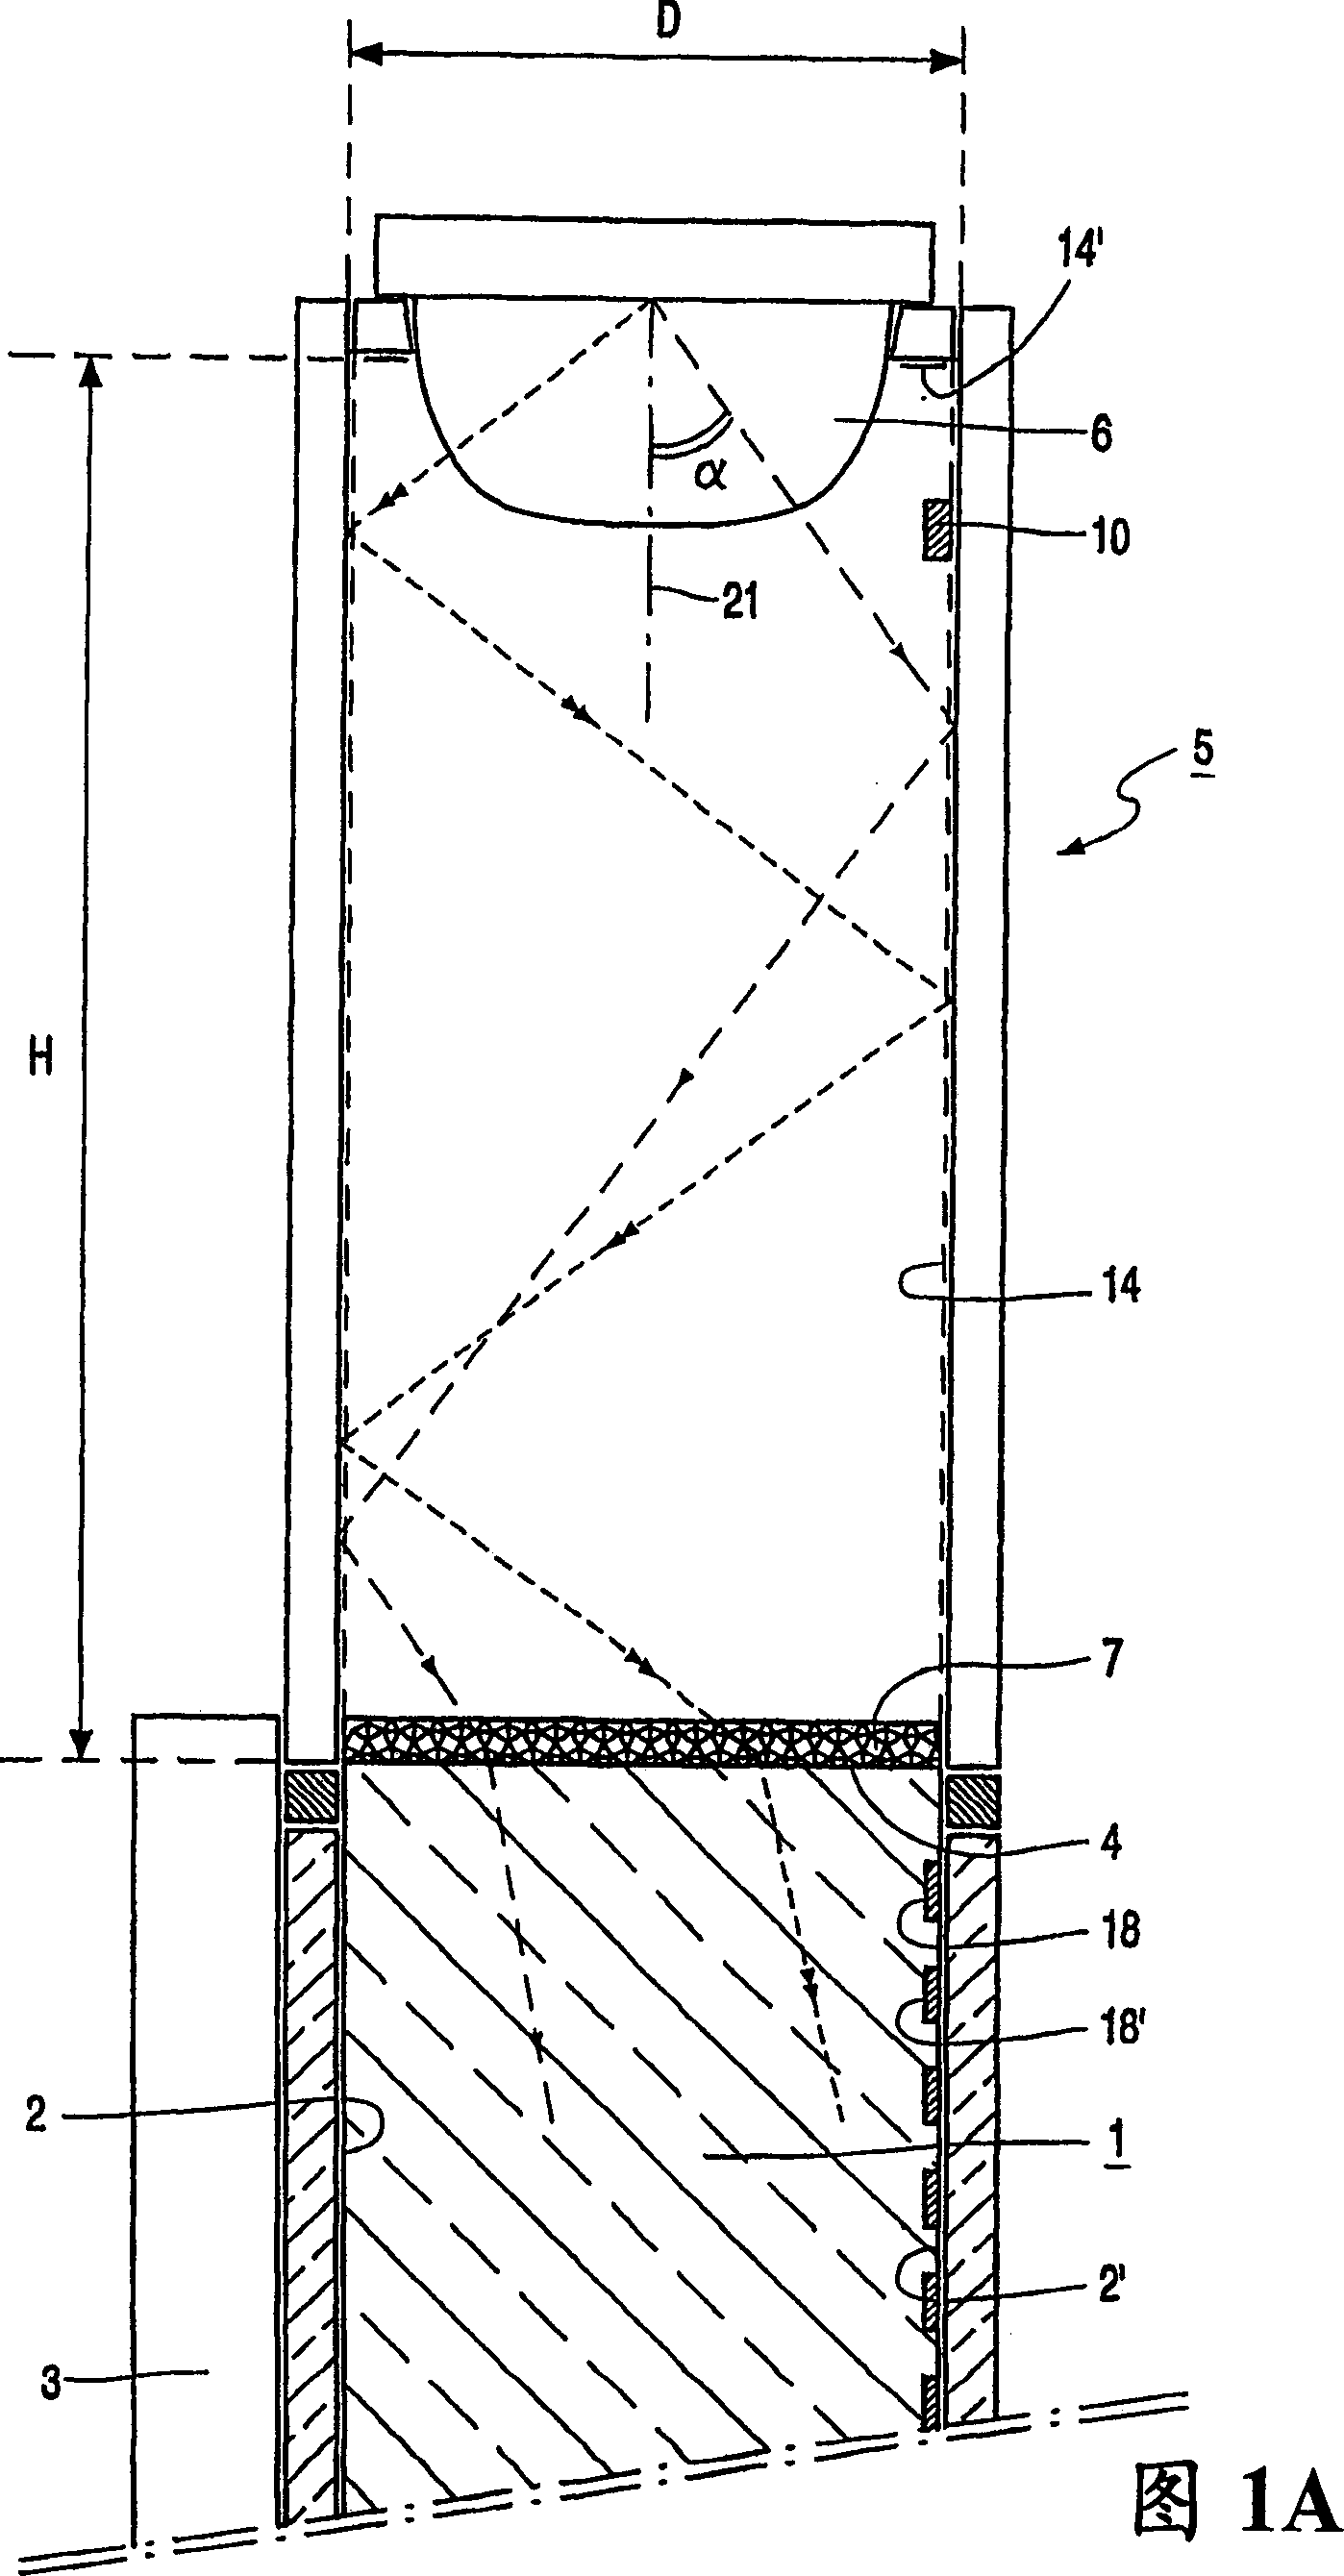 Illumination system, light mixing chamber and dispaly device